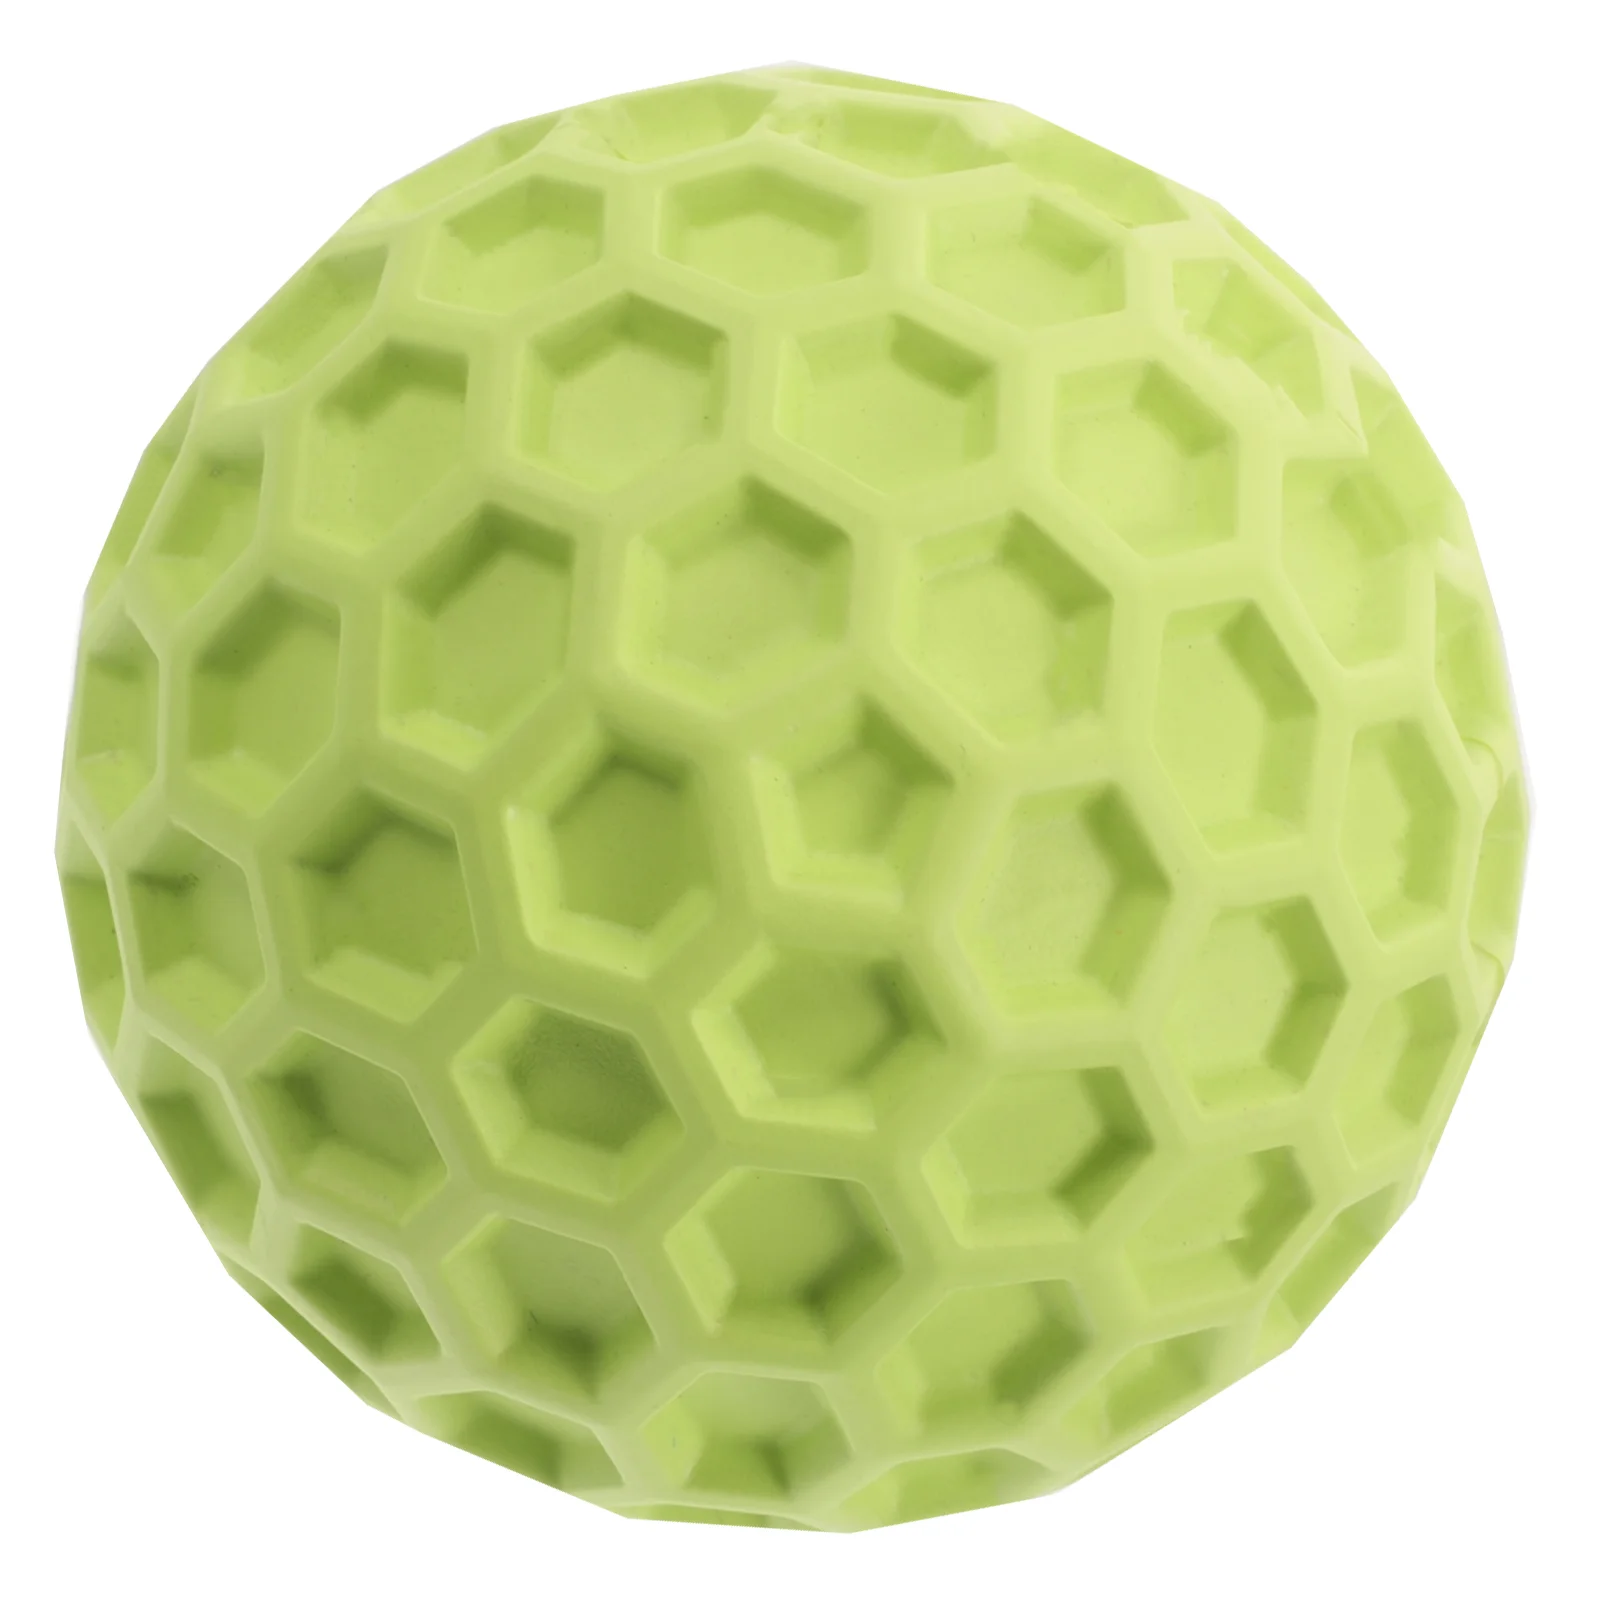 

Dog Toy Ball Puppy Chew Toys for Small Dogs Squeaky Balls Large Teething Sound Aggressive Chewers